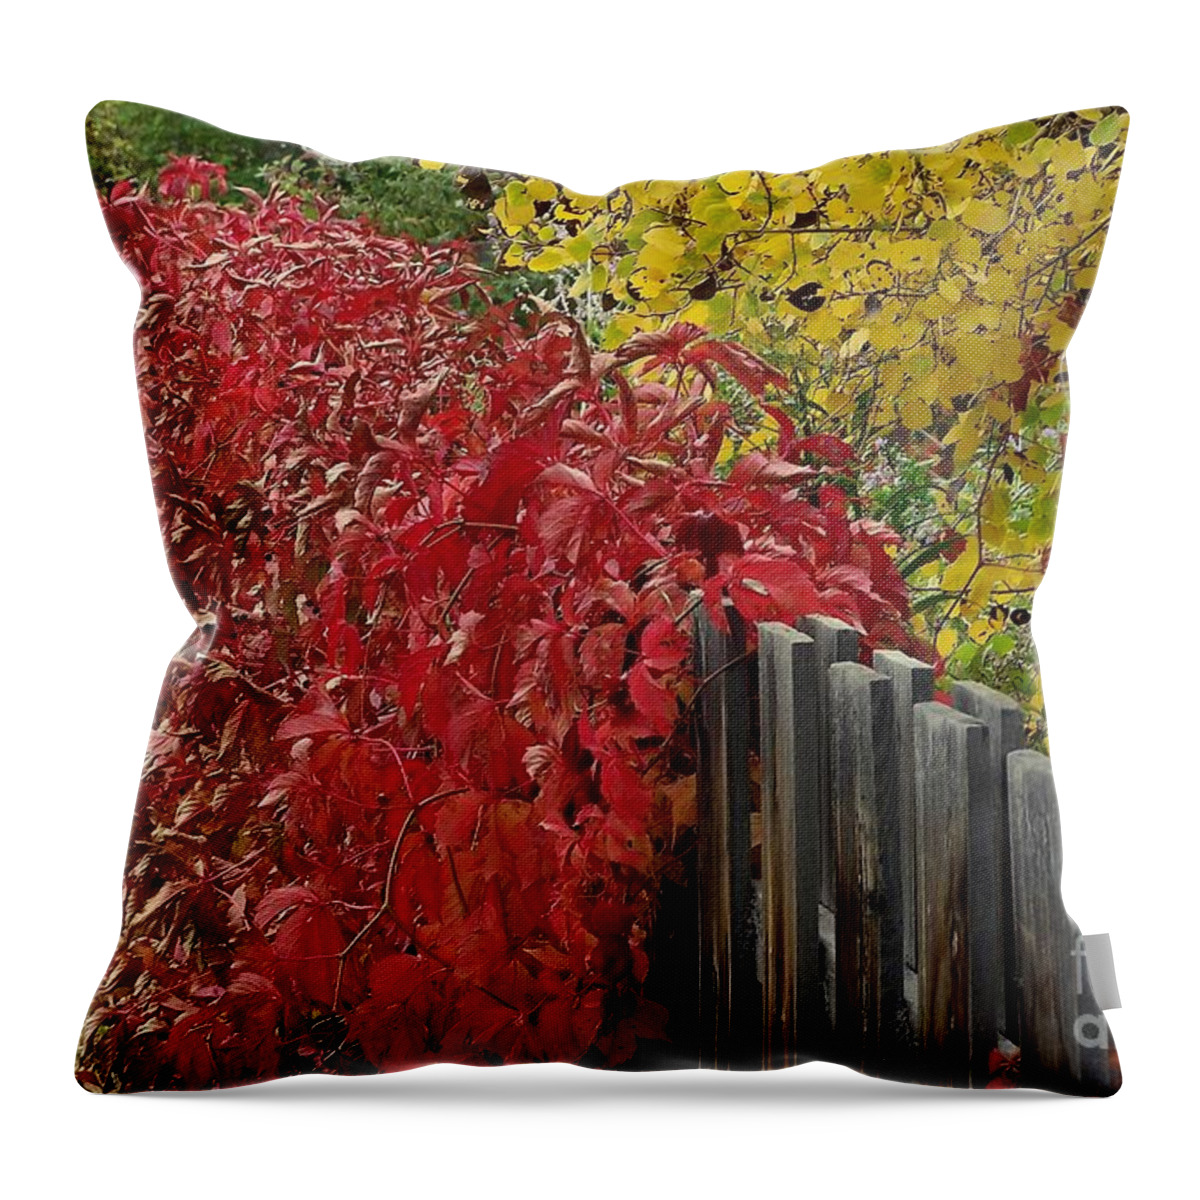 Fall Colors Throw Pillow featuring the photograph Red Fence by Dorrene BrownButterfield